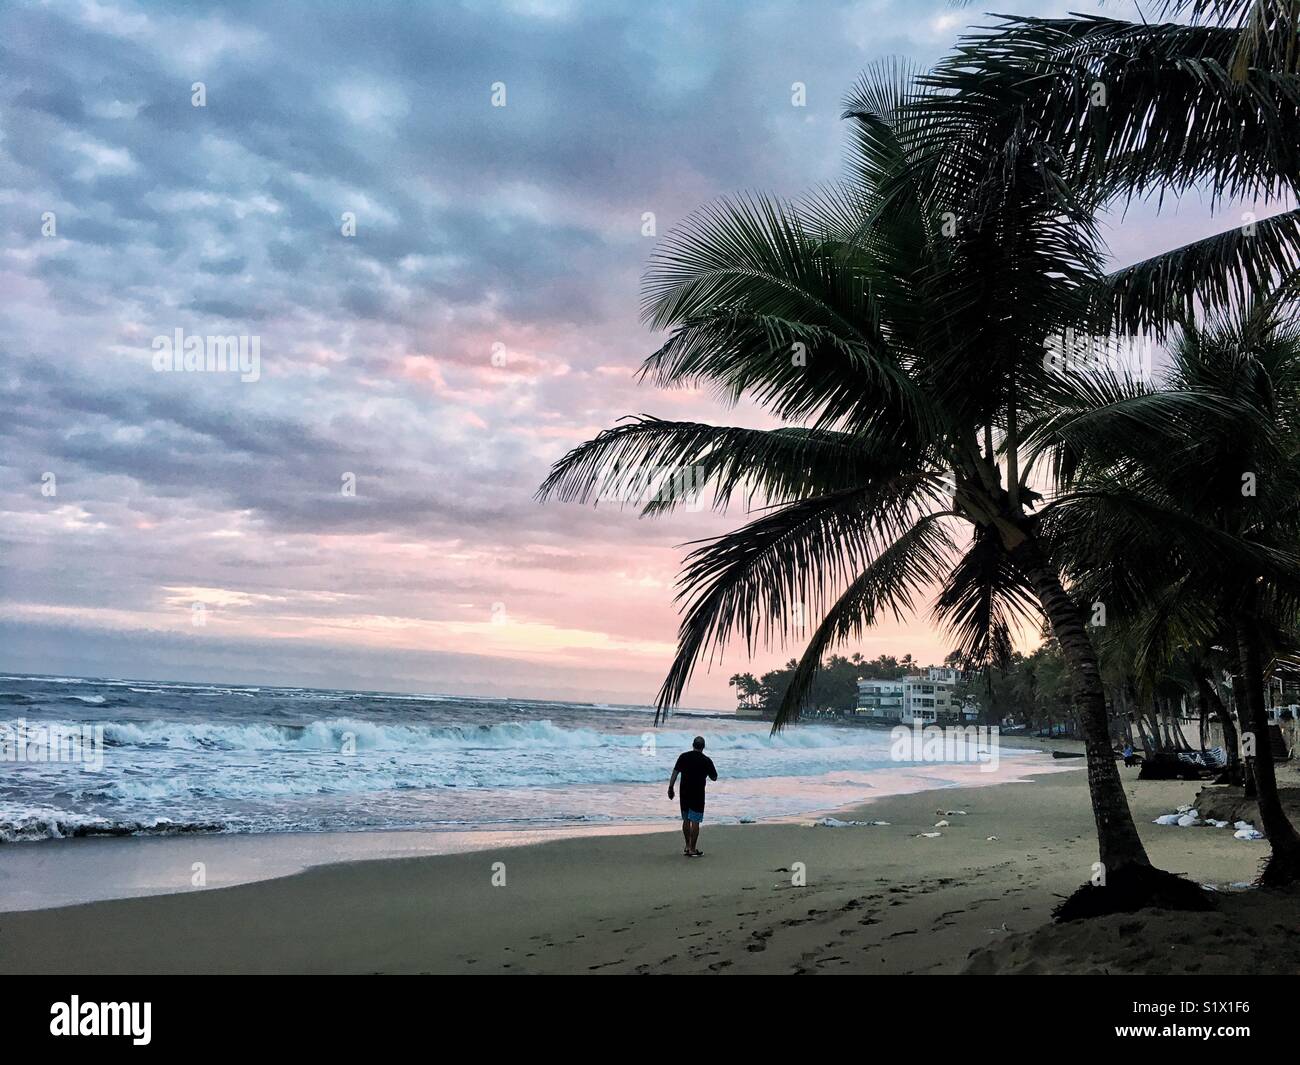 A person taking a stroll during sunrise on a beach in the Dominican Republic. Stock Photo